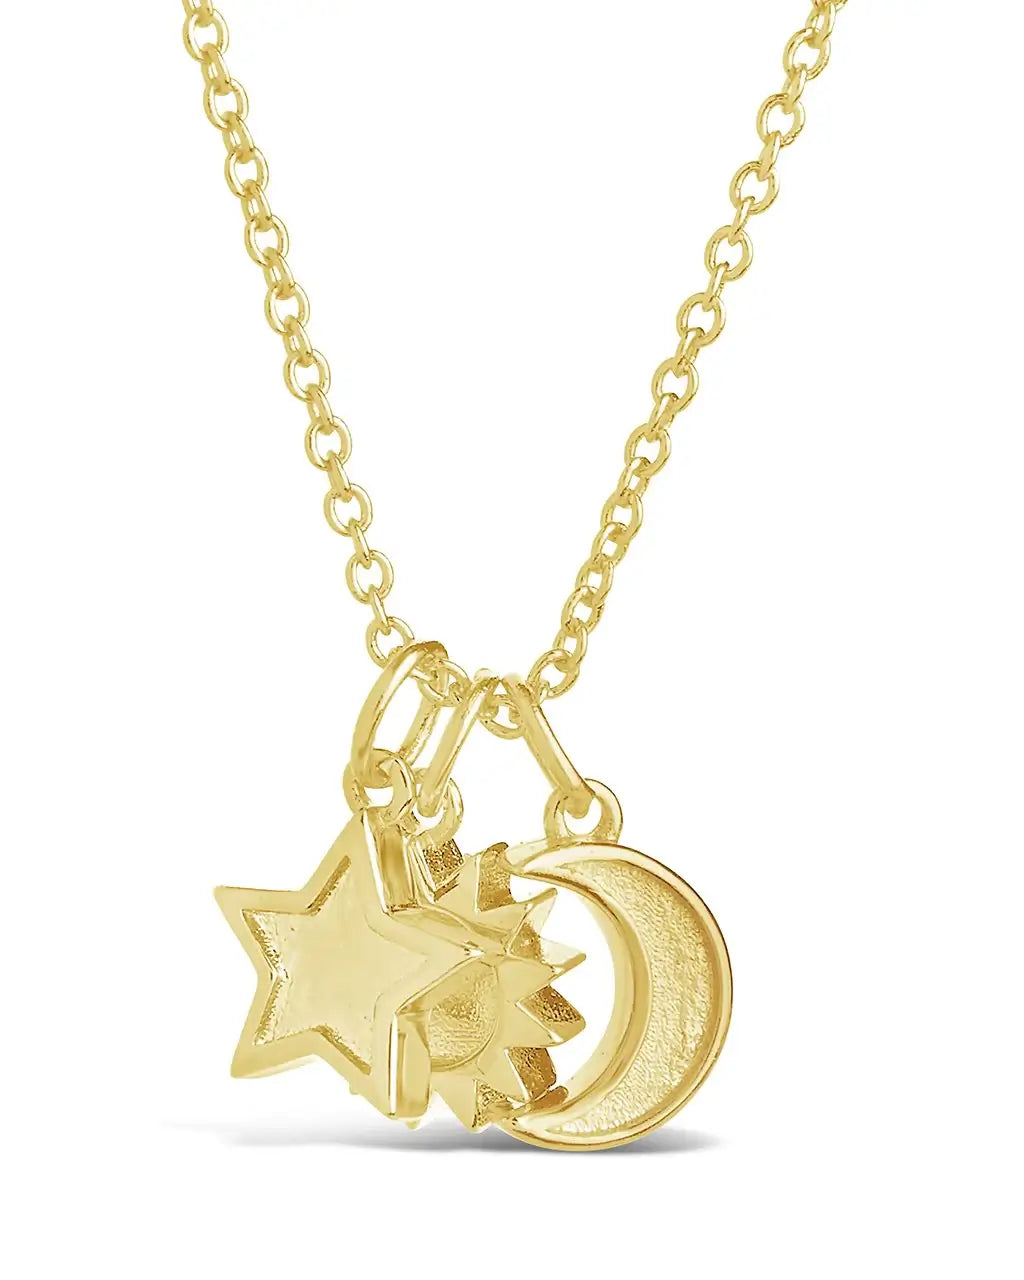 Crystal Gold Pendant Necklaces For Women Girls Fashion Moon Star Sun  Necklace 2020 Charm Choker Jewelry Best Friend Gift - AliExpress